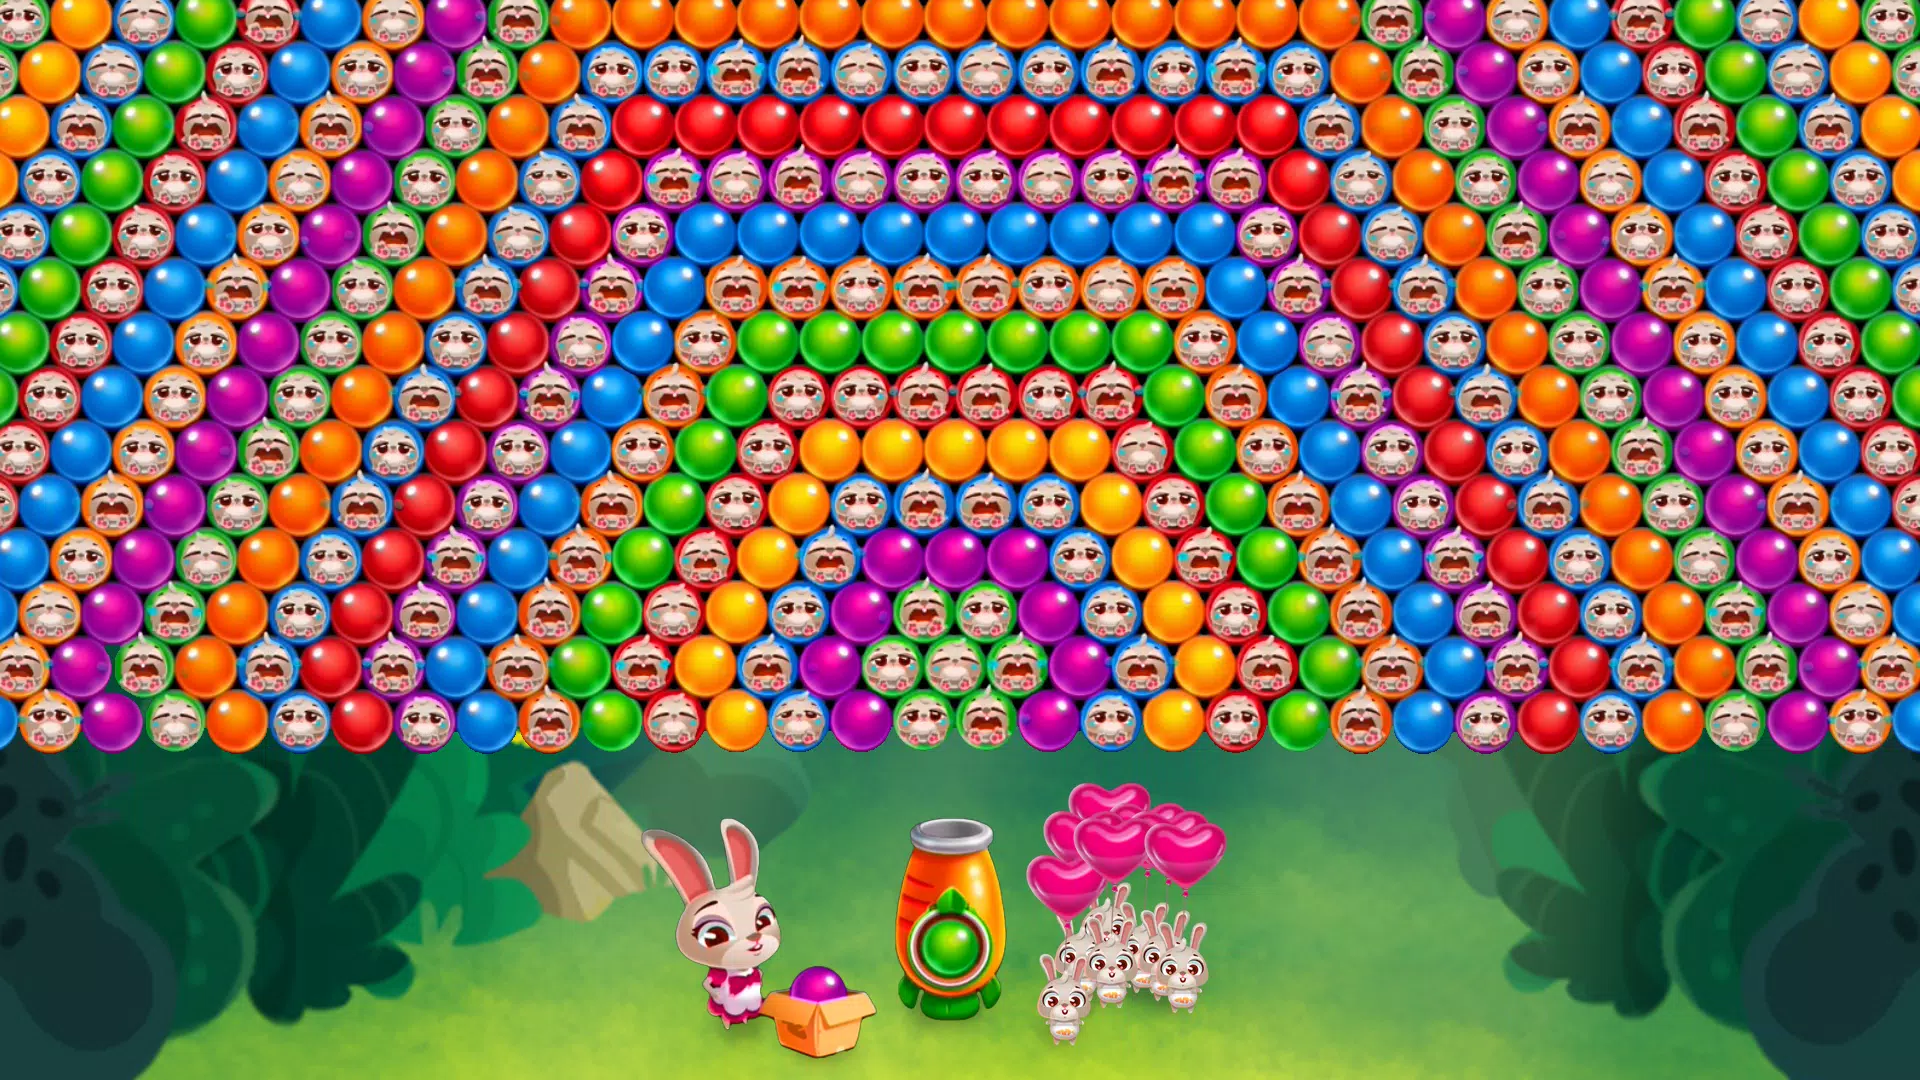 Bunny Pop for Android - APK Download